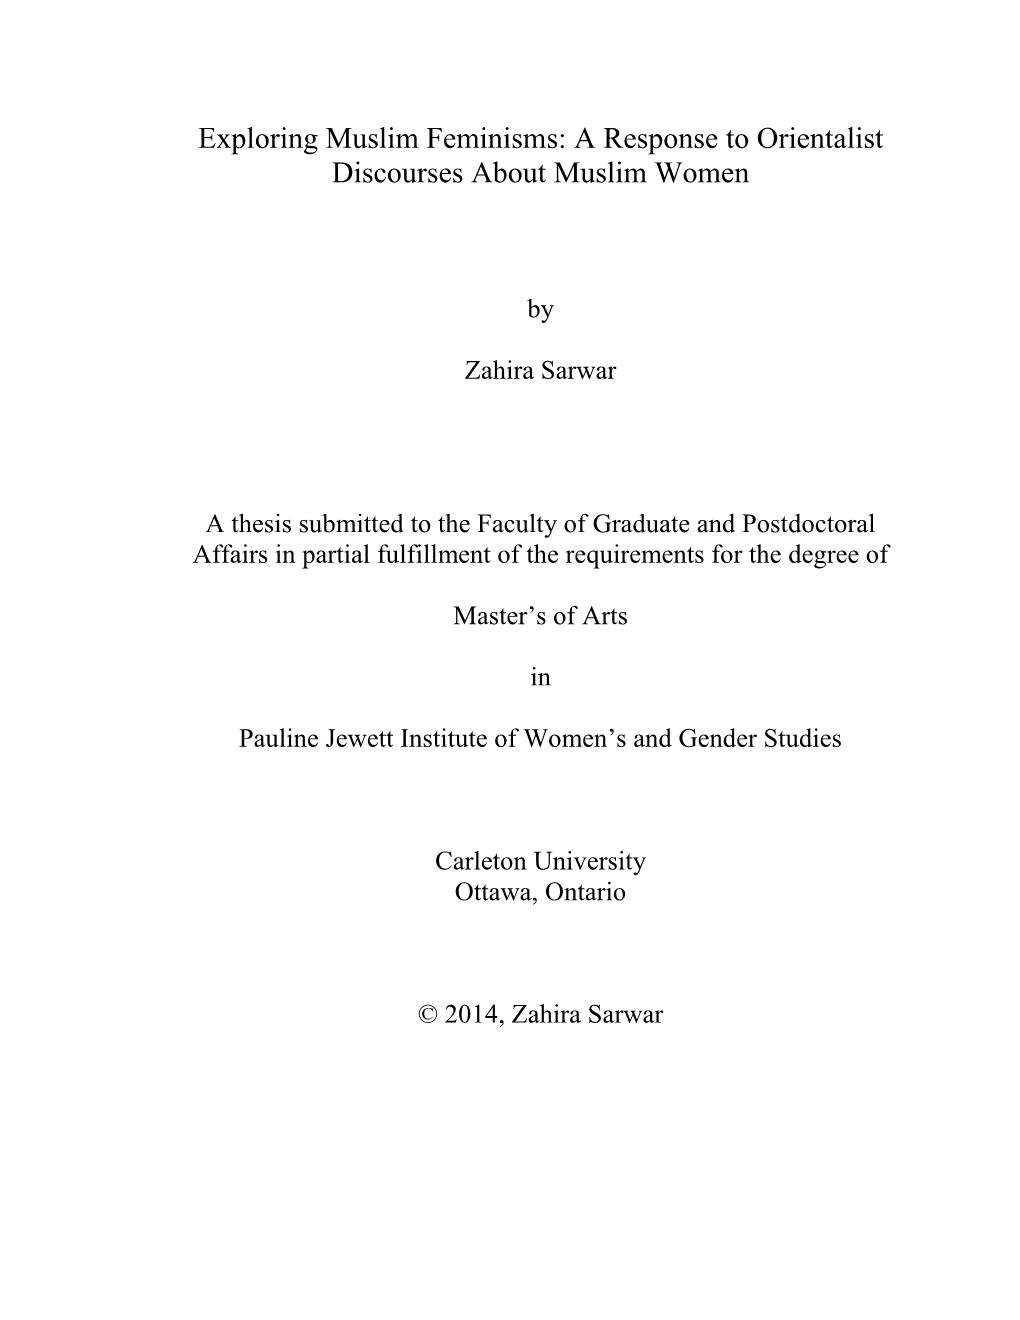 A Response to Orientalist Discourses About Muslim Women